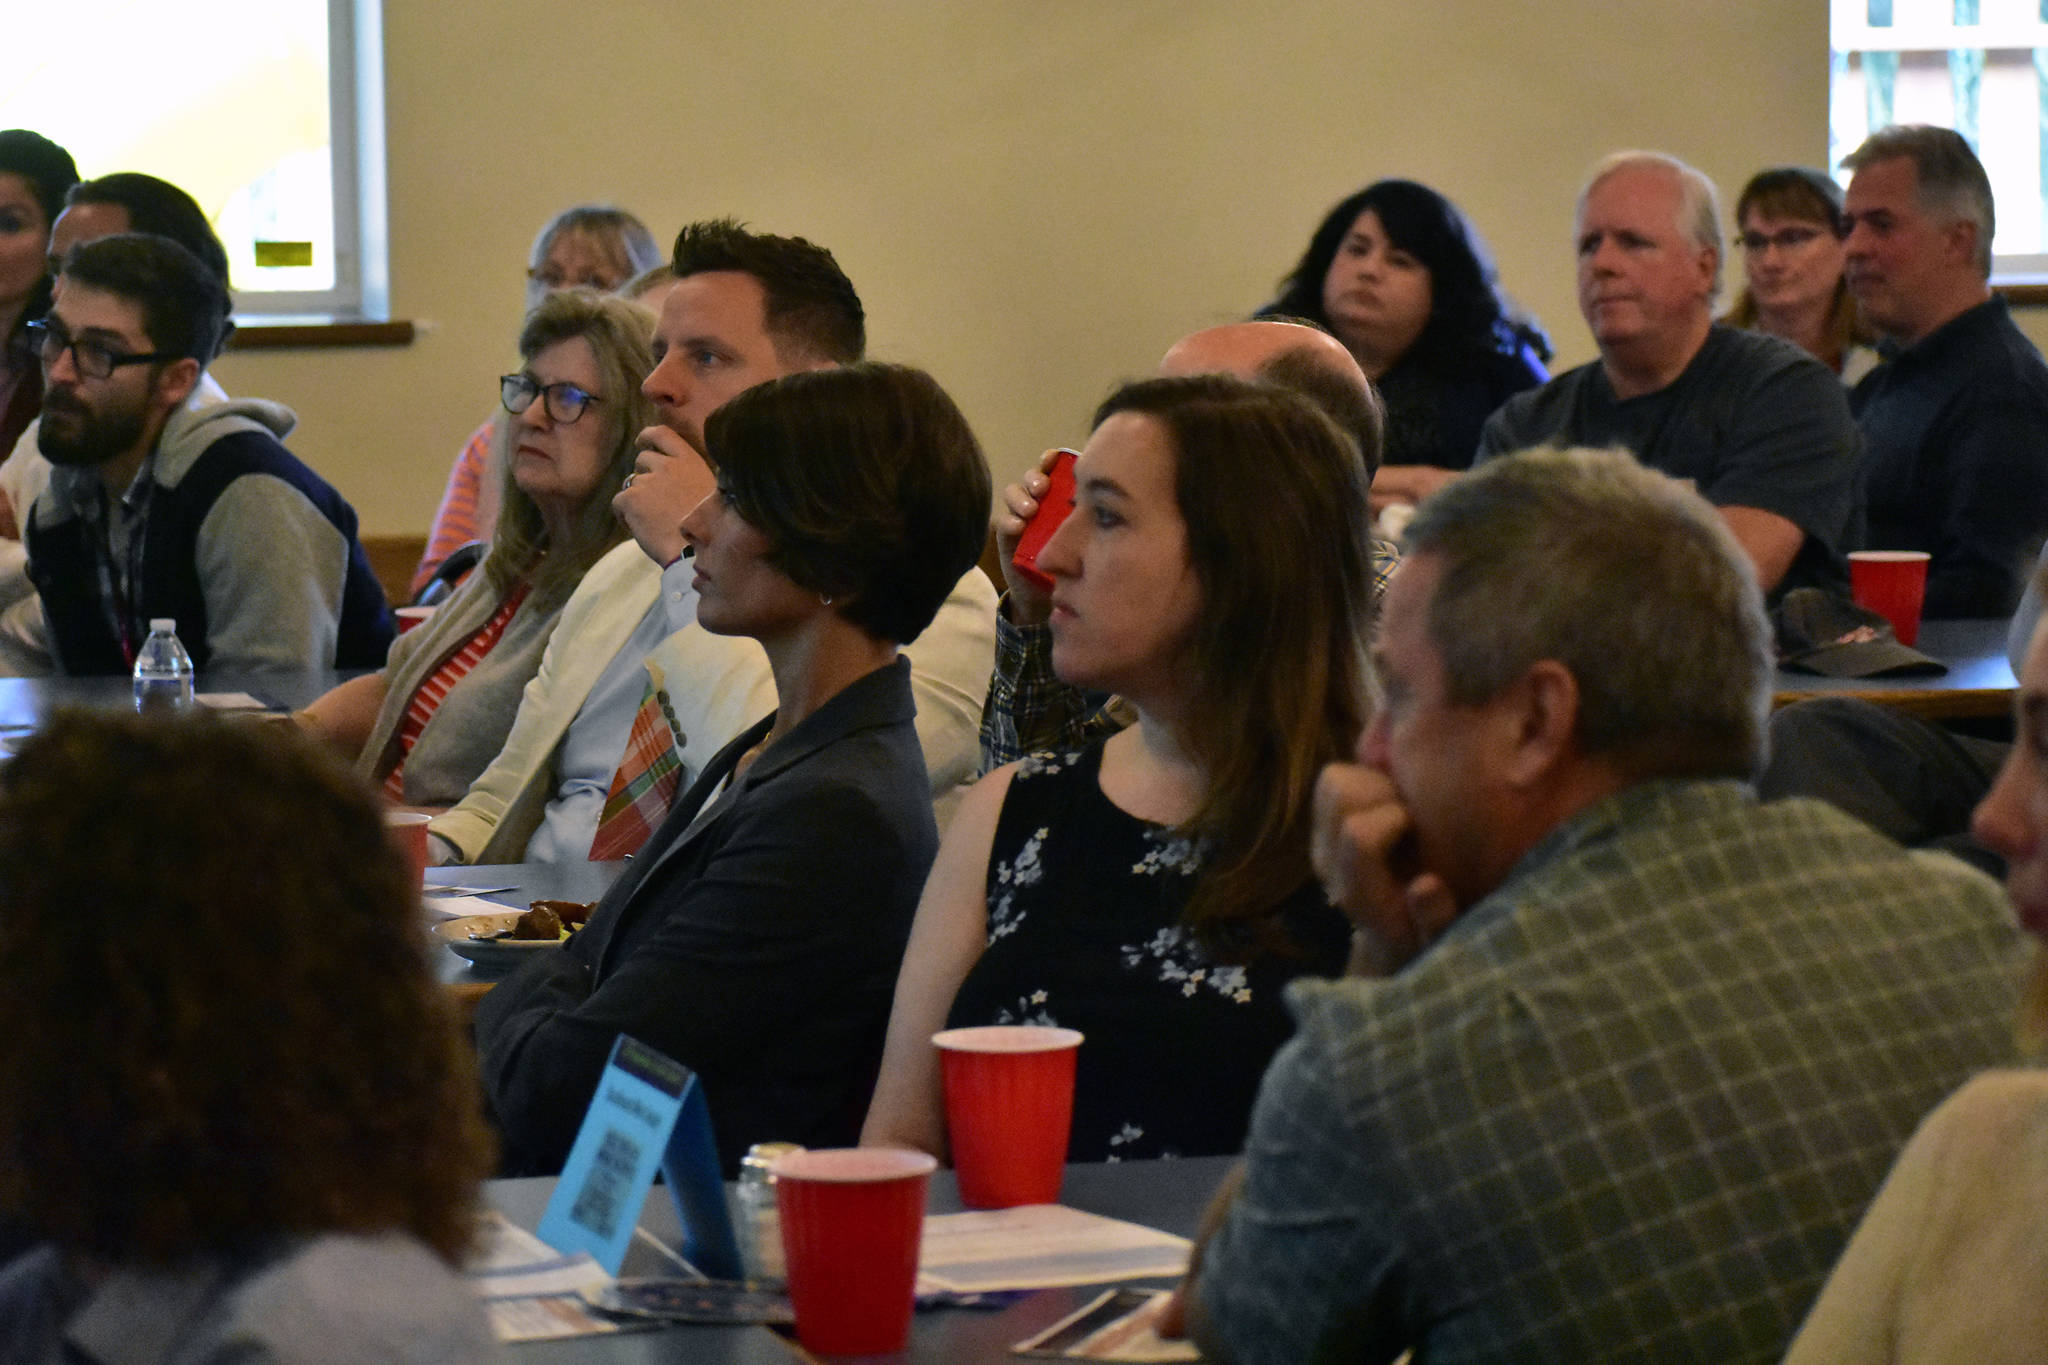 The audience at the Moose Lodge listens to Frank Reid speak at the Juneau Chamber of Commerce luncheon on Thursday, Sept. 12, 2019. (Peter Segall | Juneau Empire)